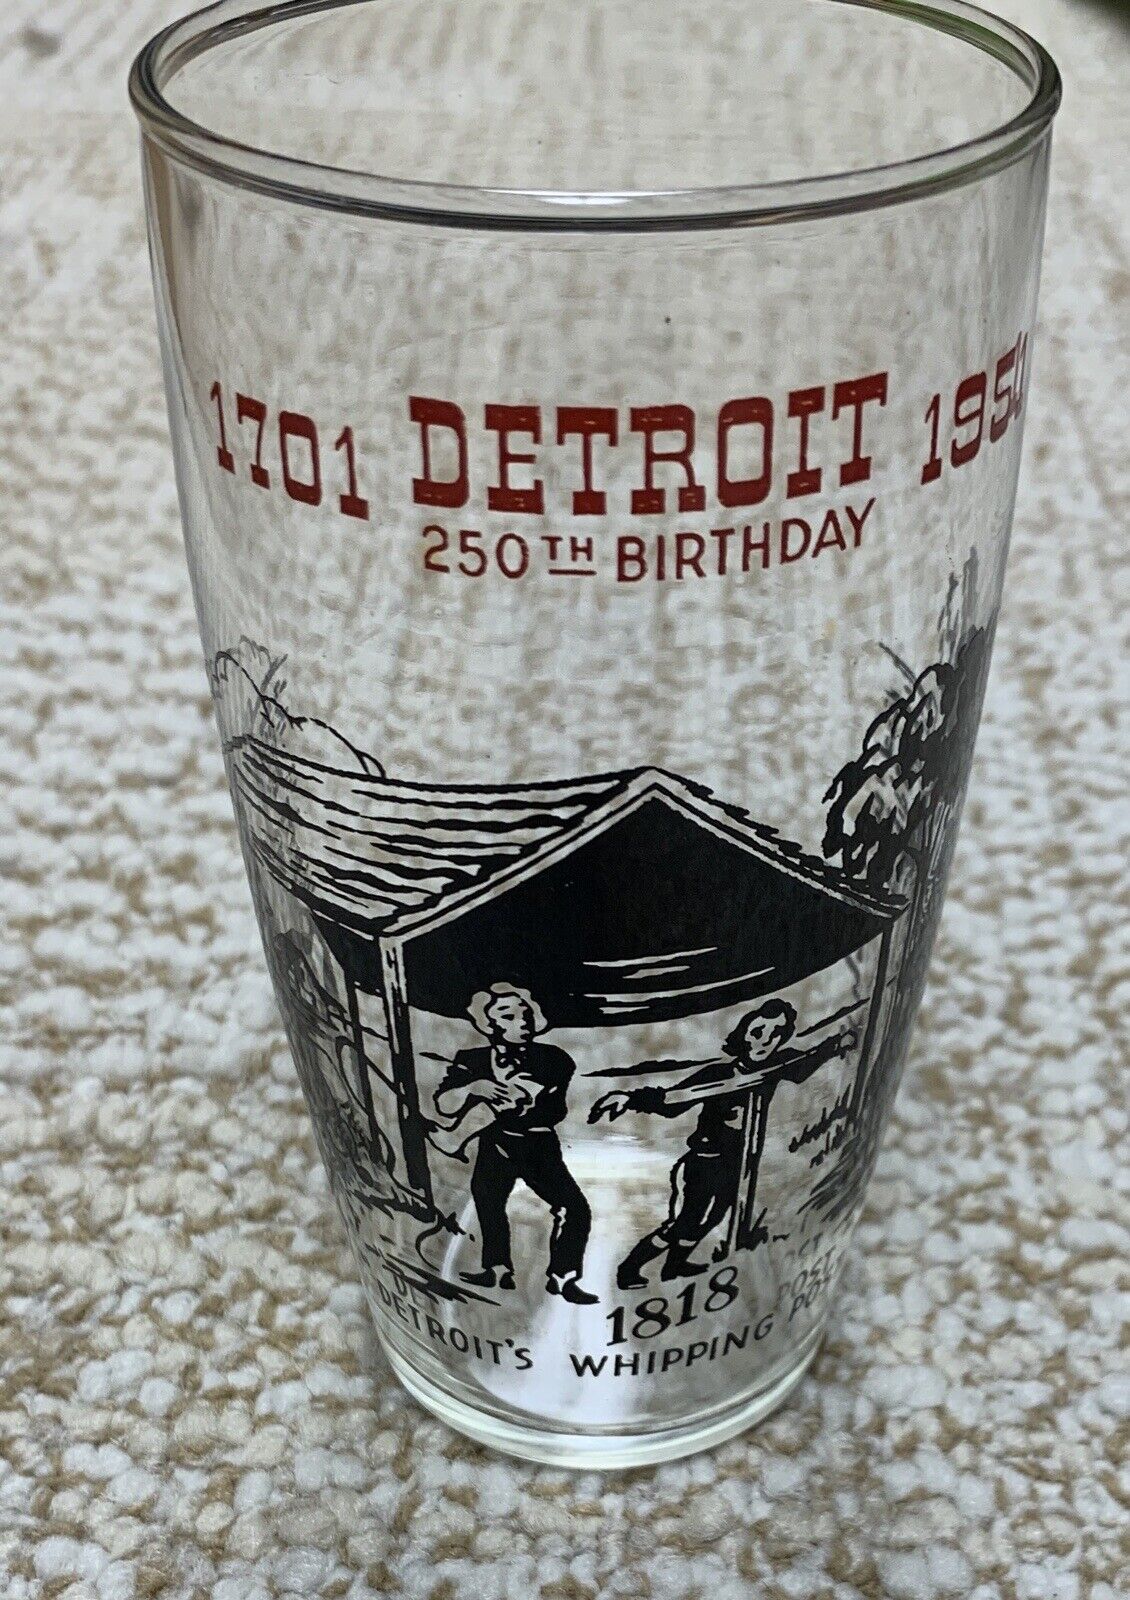 Detroit Michigan 1701 to 1951 Detroit\'s Whipping Post Drinking Glass 250th vtg